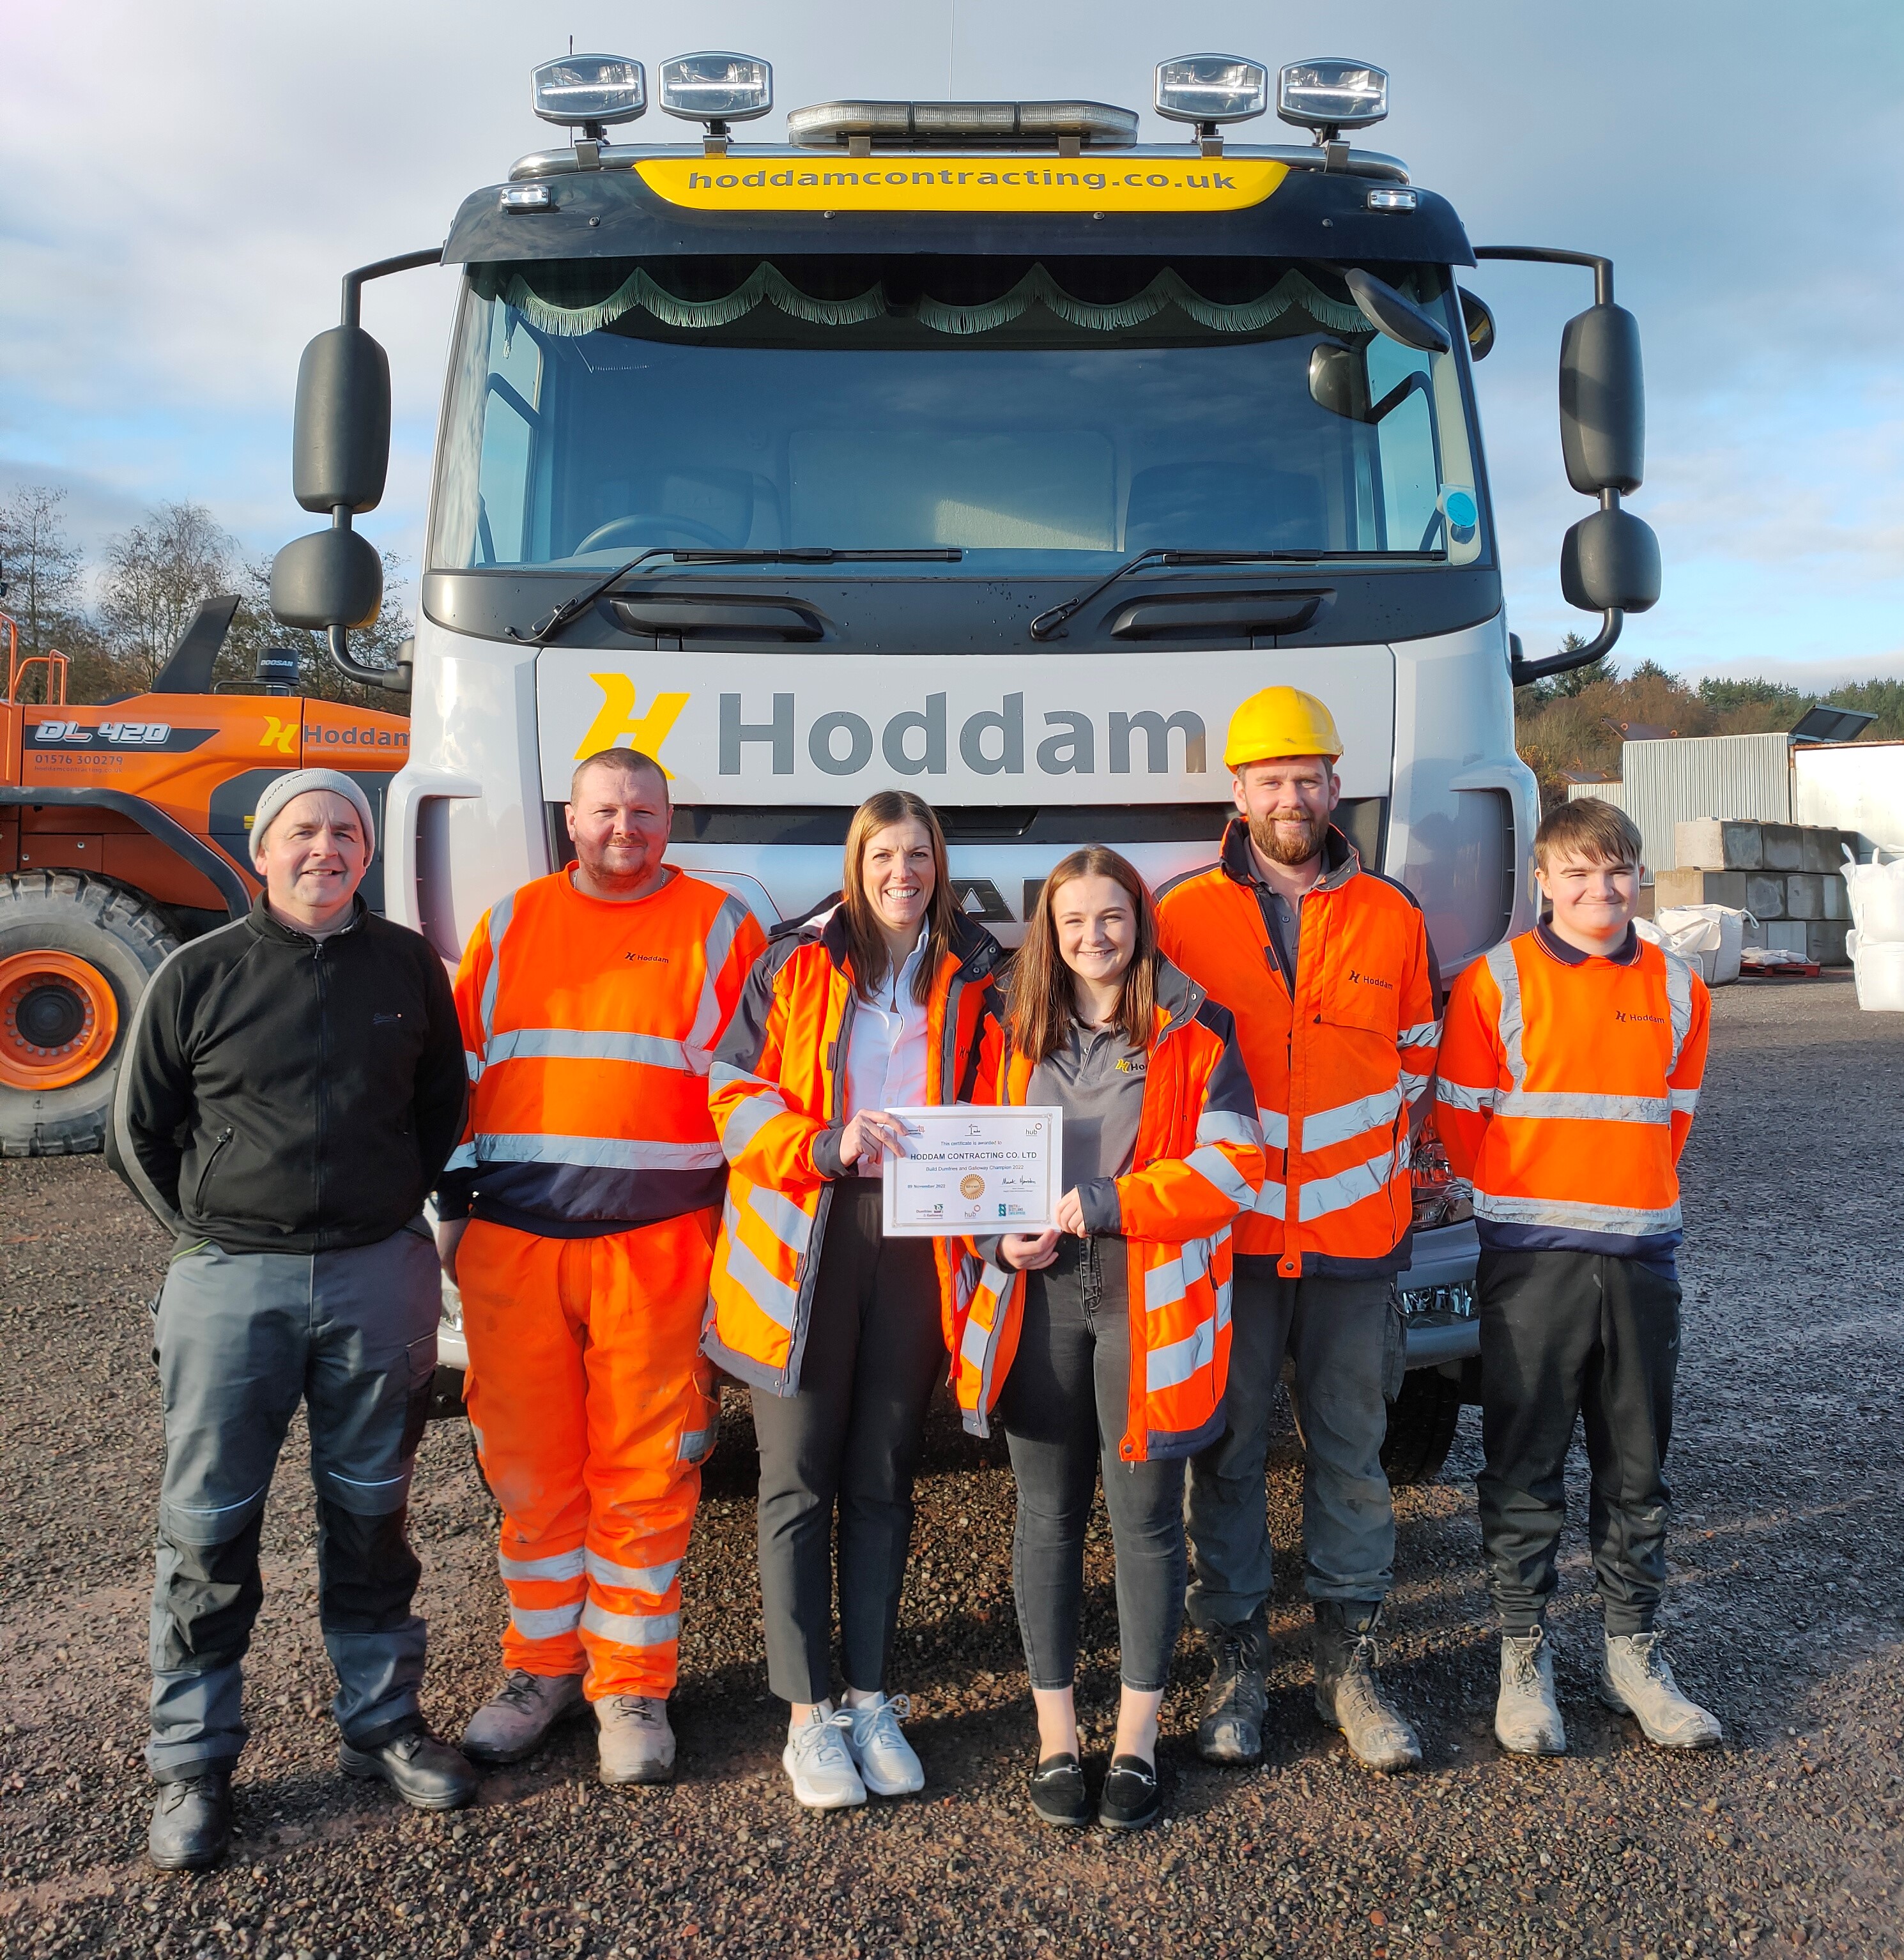 Dumfries contractor wins ‘Champion Business Award’ from hub South West